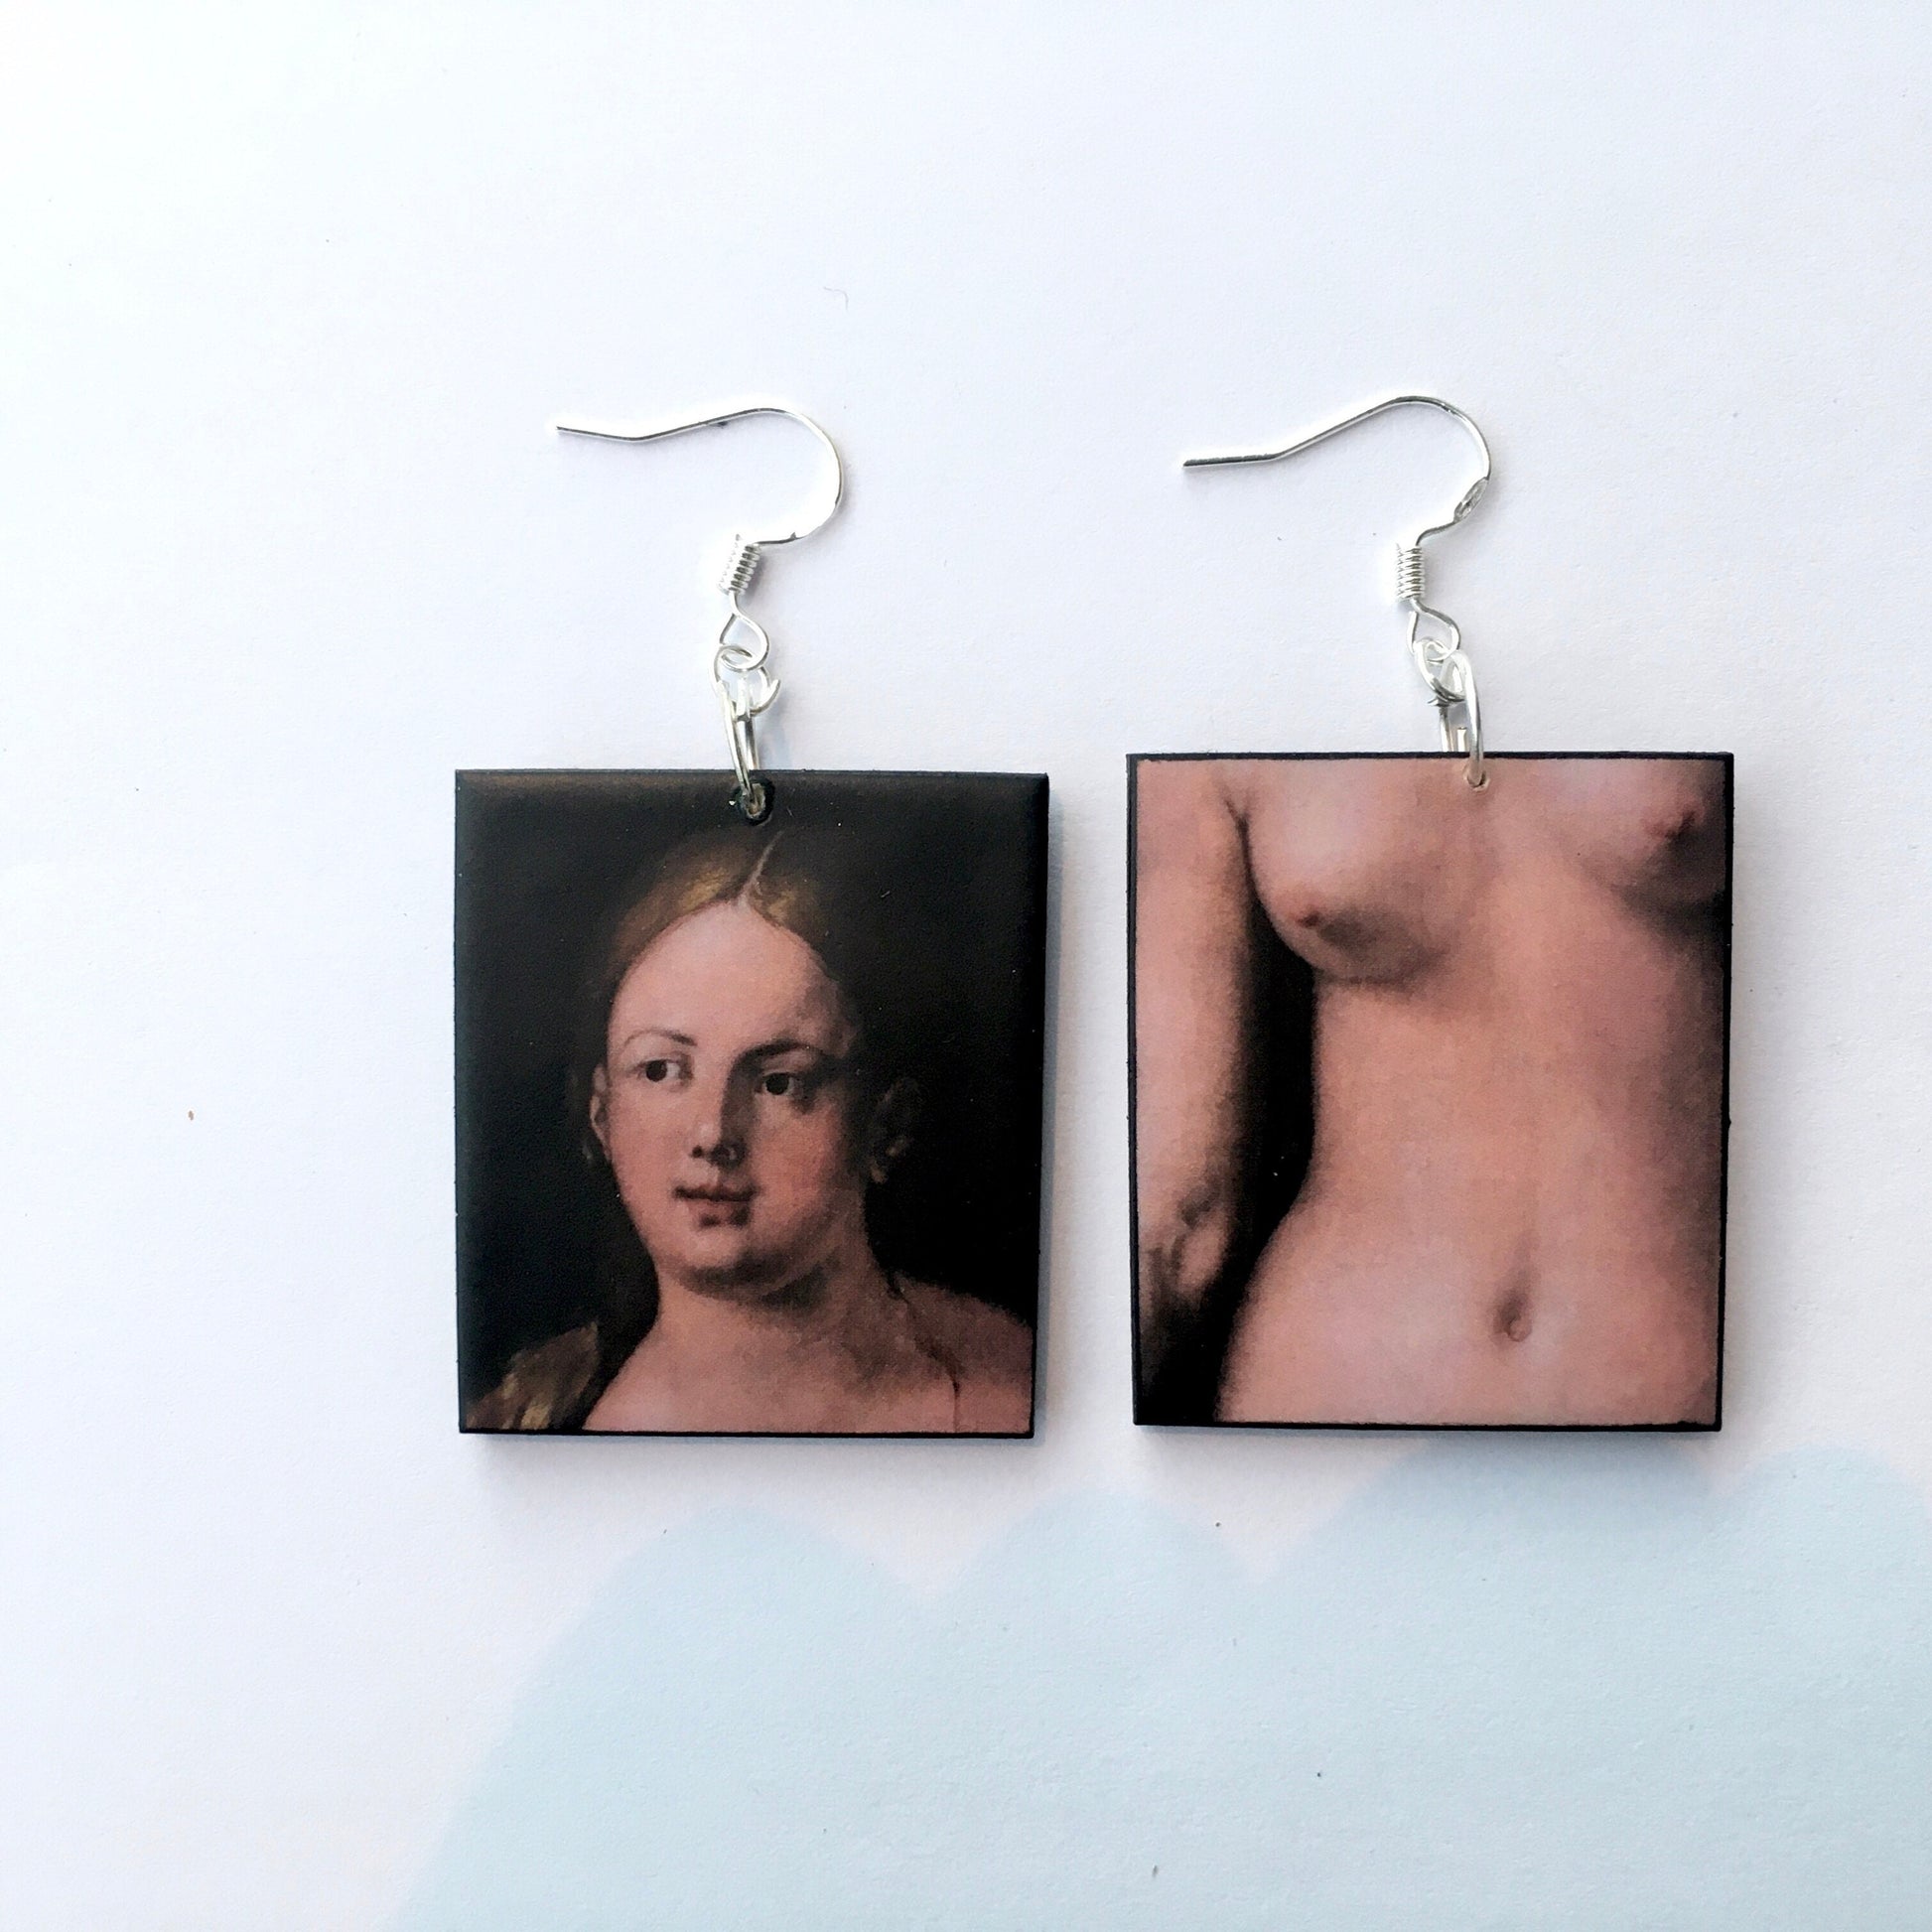 Albrecht Durer, Eve, gothic art style. Wooden, artsy earrings with details of Eve body, nude art earrings.